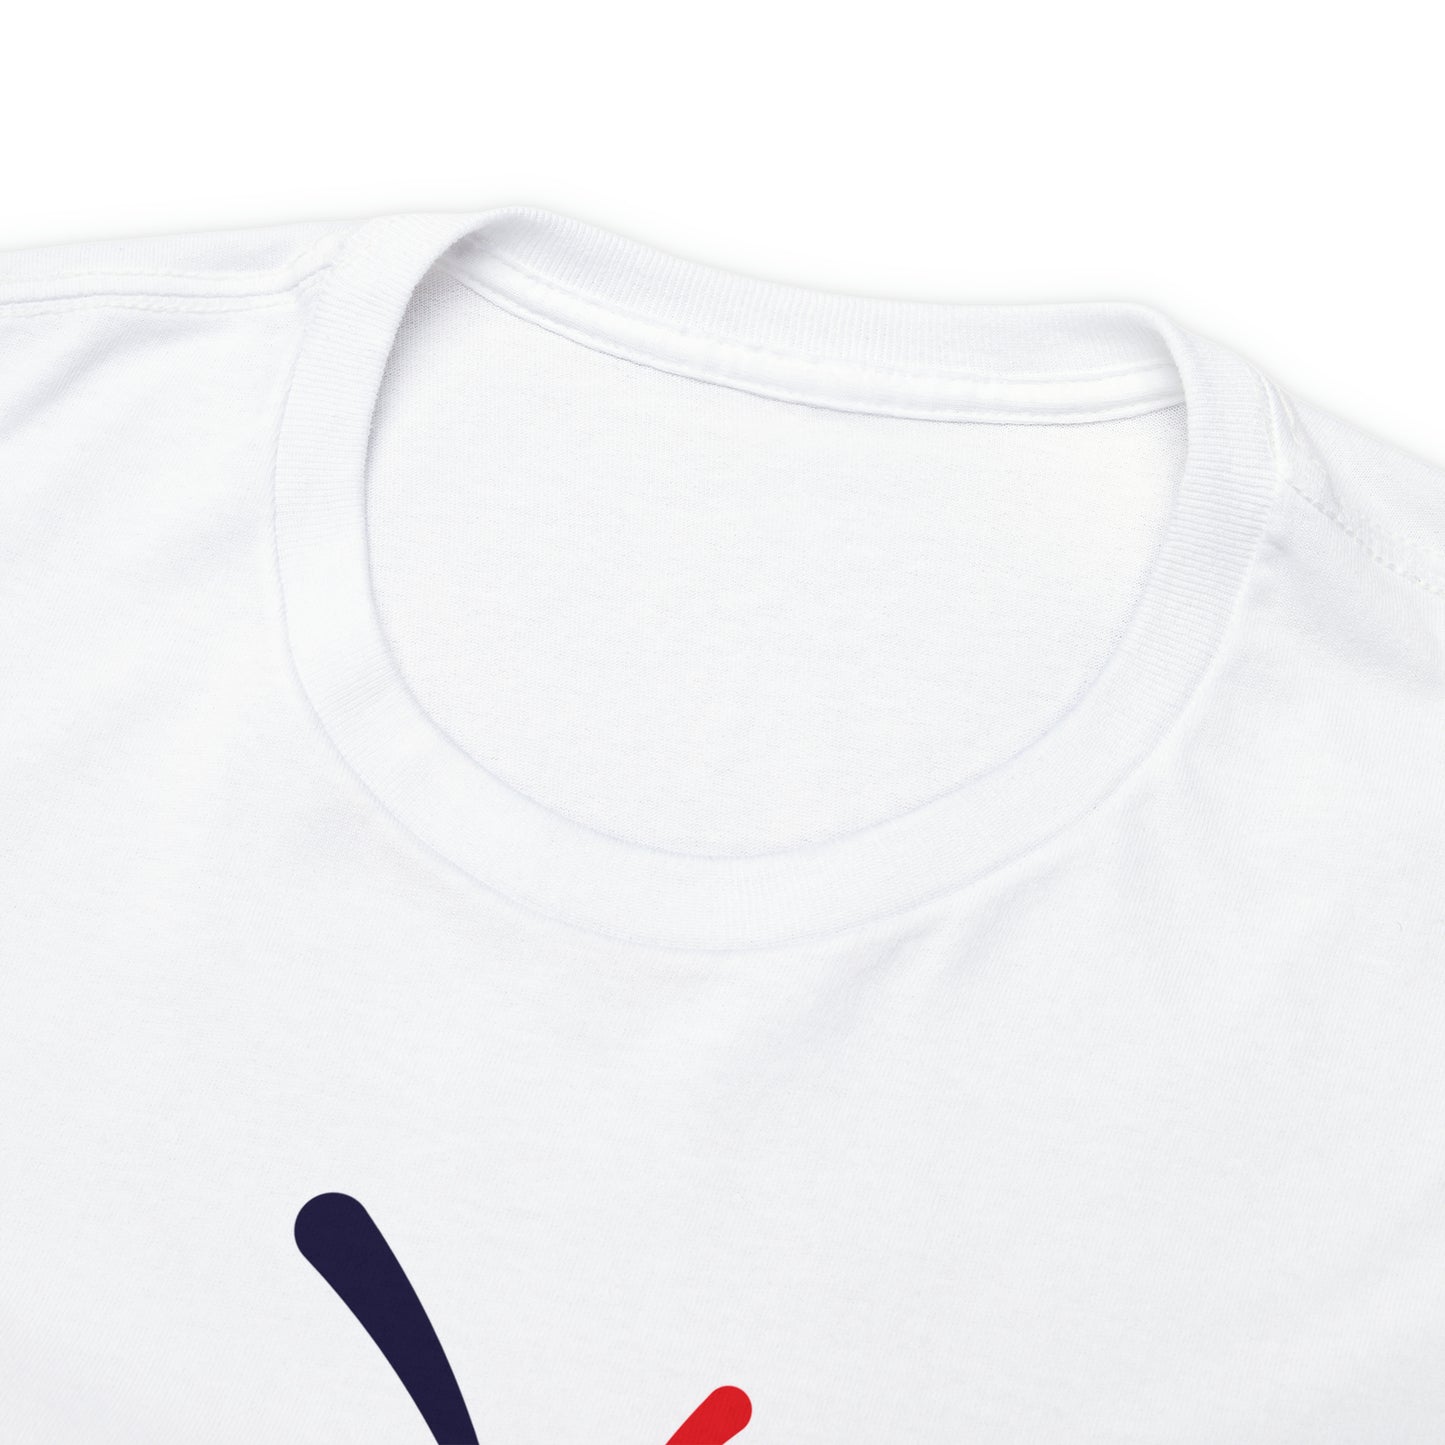 Front neck view of the White t-shirt